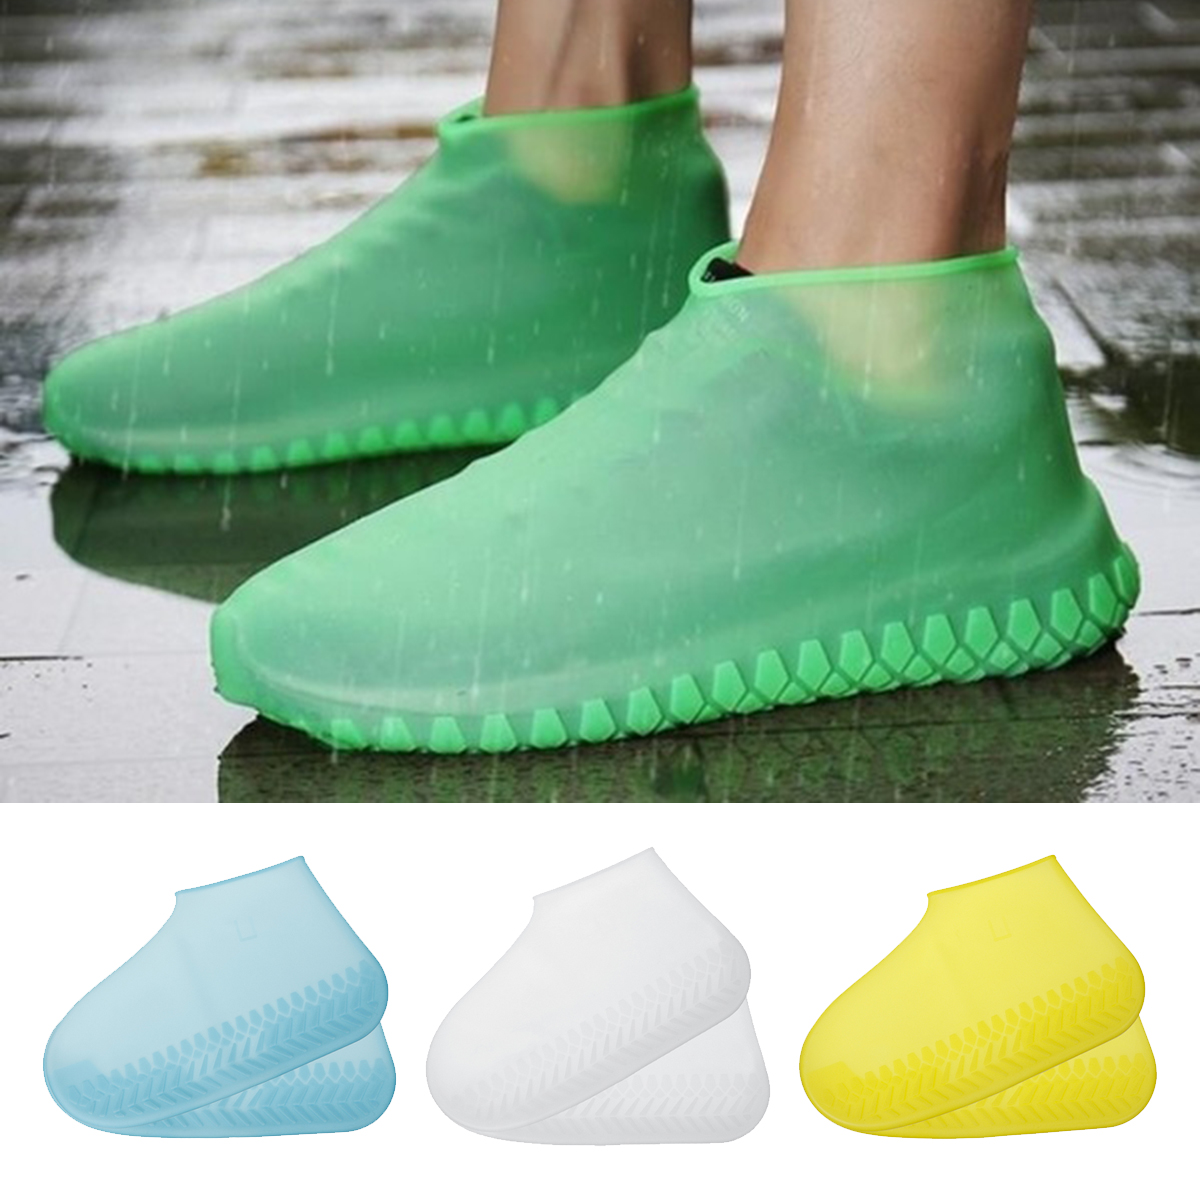 Luminous Waterproof Shoe Covers Silicone Non-Slip Overshoes Shoes Protector Reusable Wear-Resistant от Banggood WW